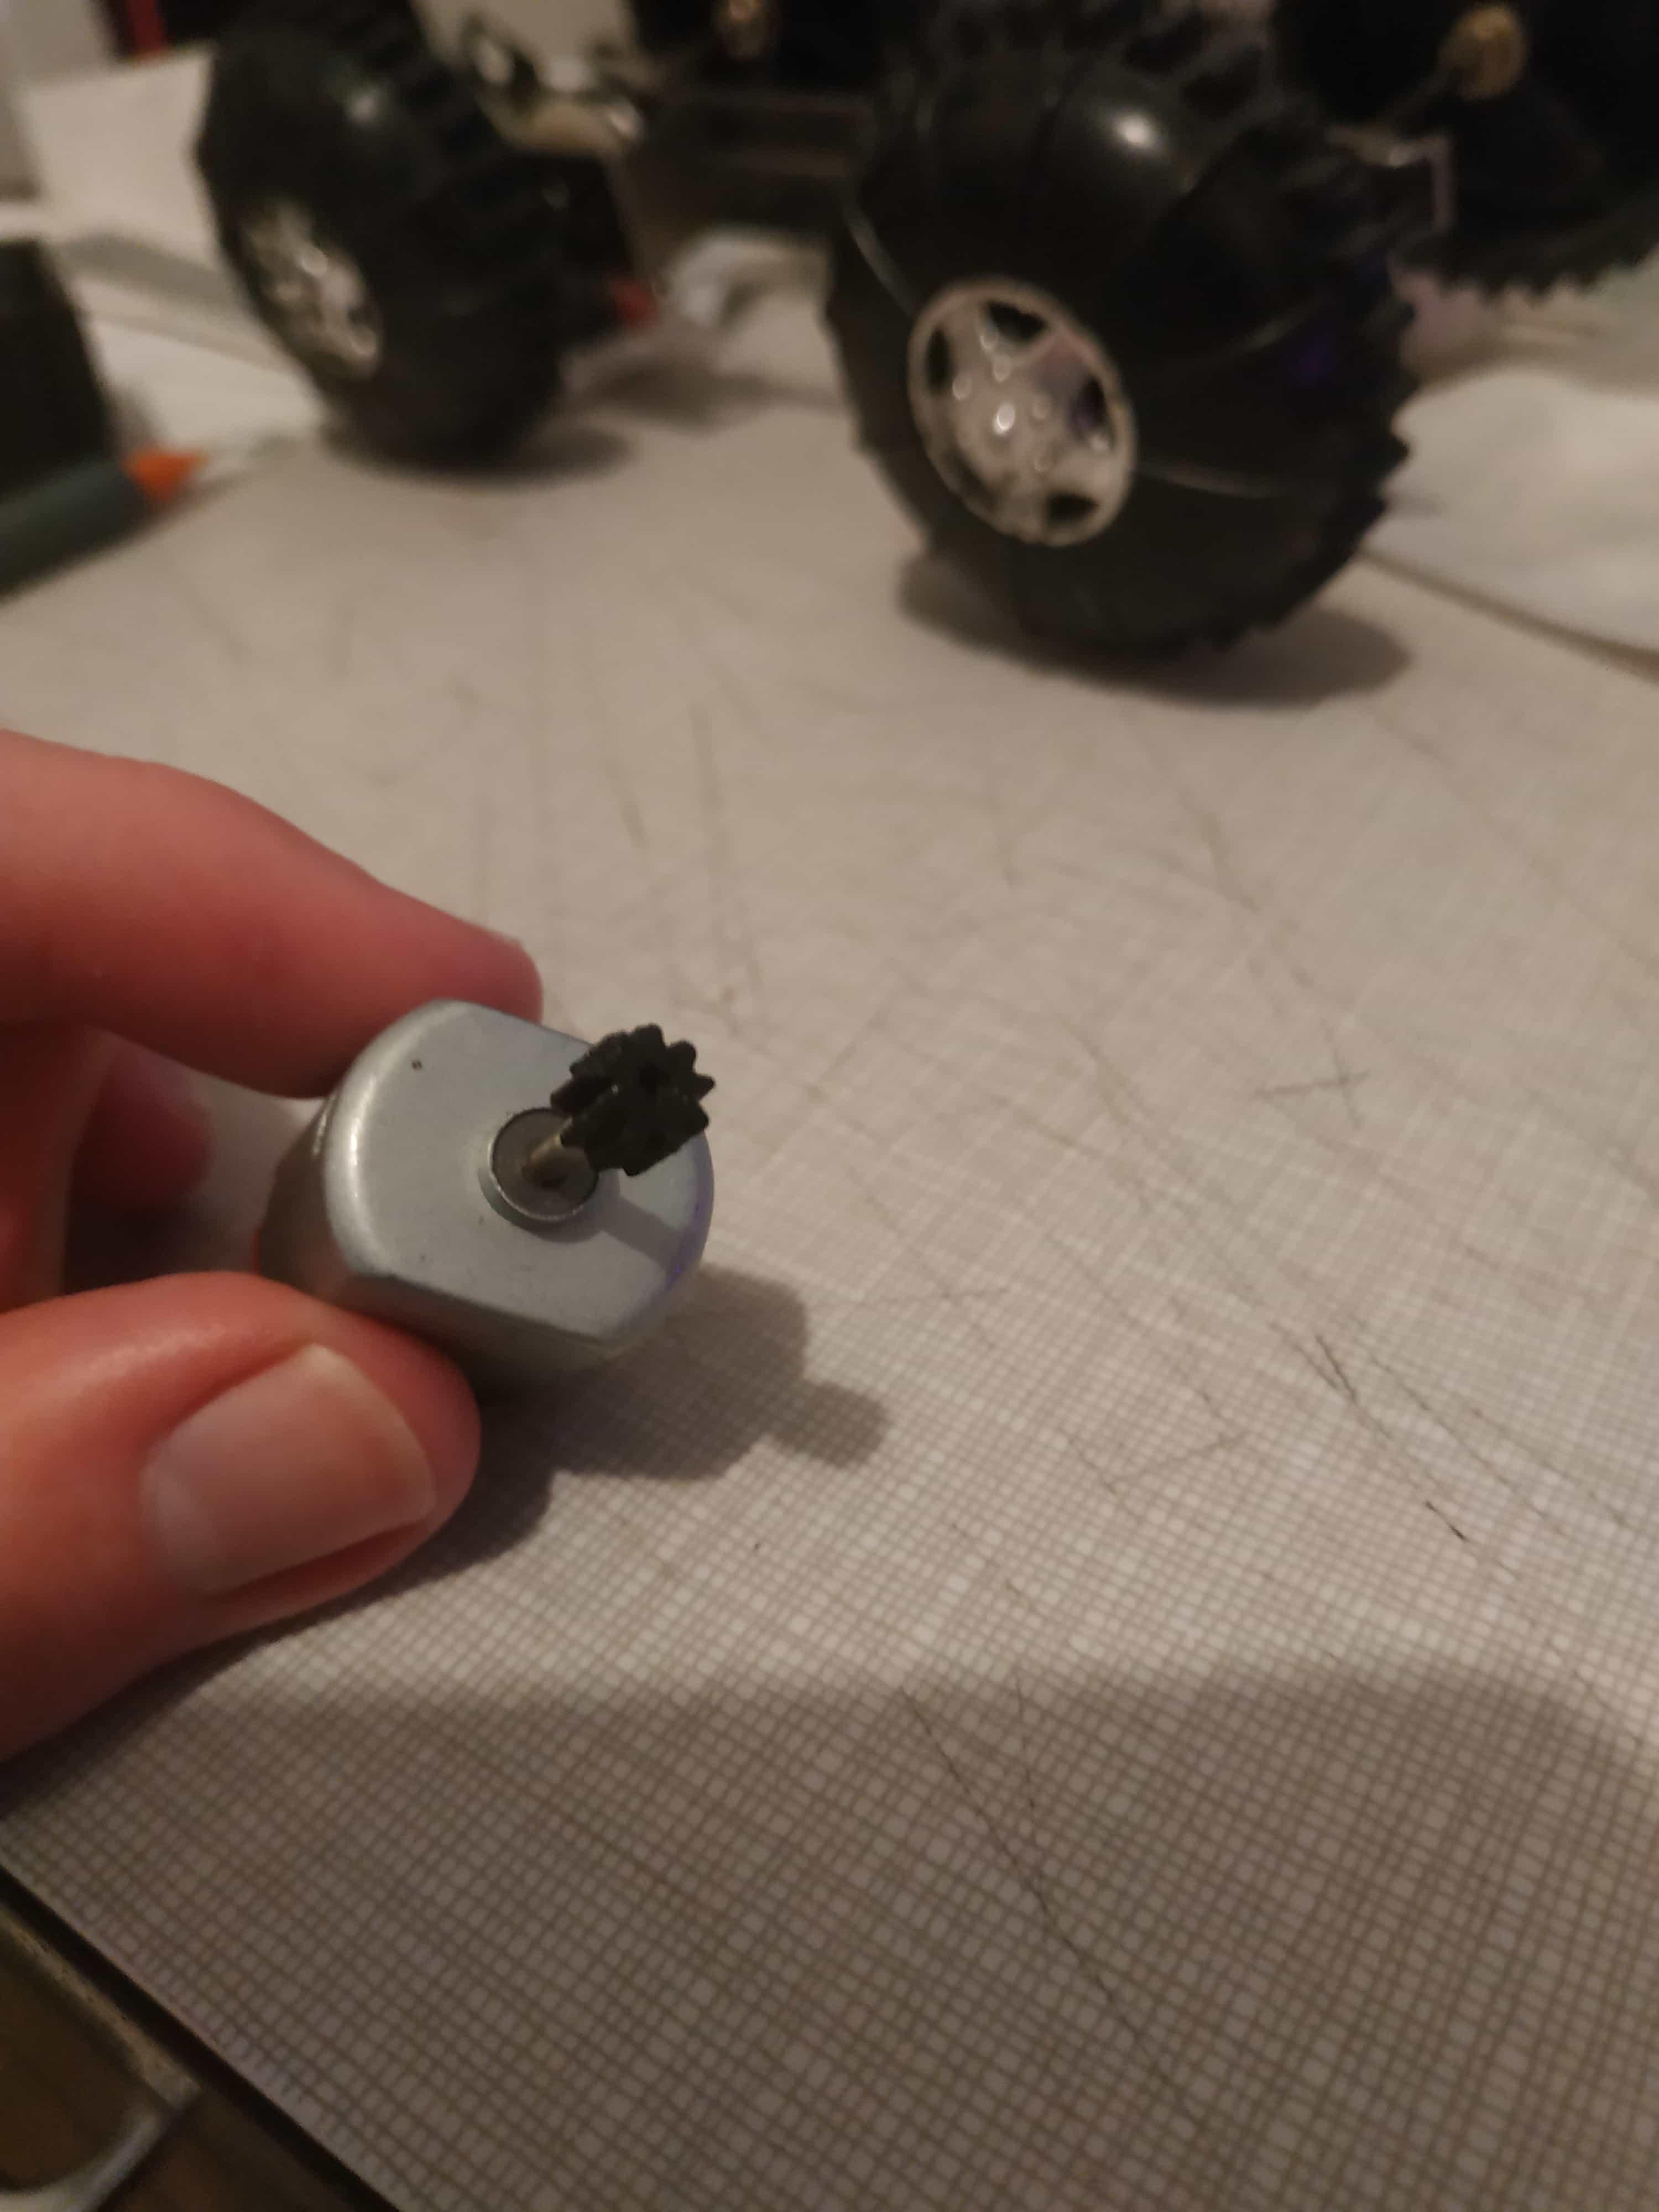 My hand holding up a small DC motor with a tiny plastic gear on it, the buggy is in the background